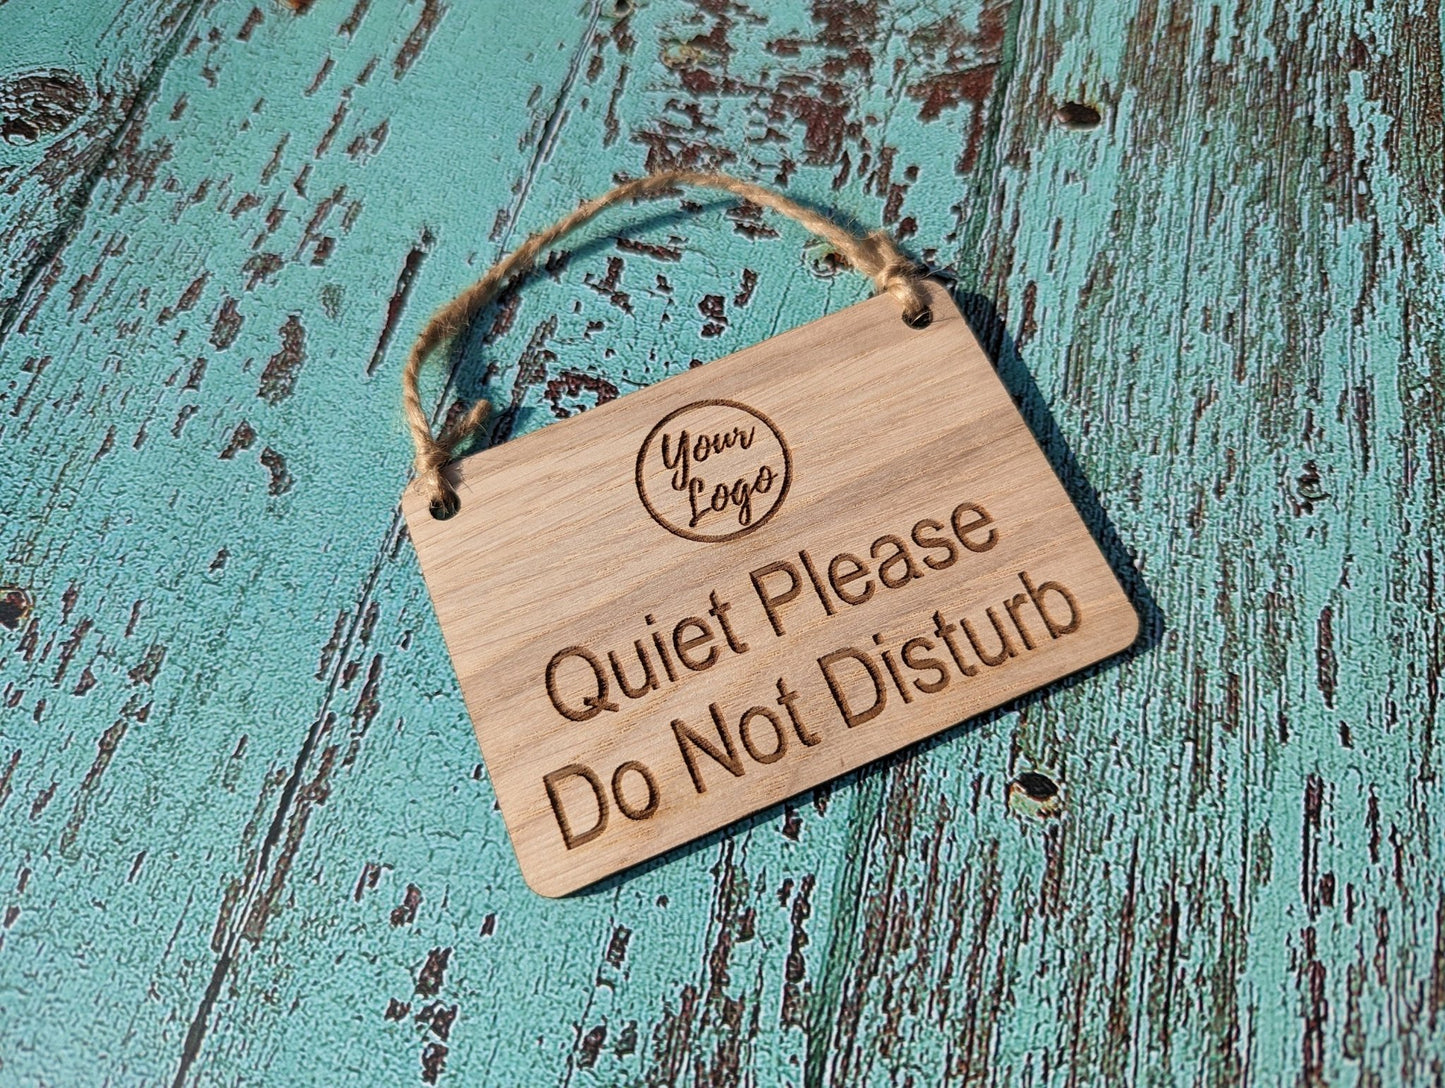 Personalised "Quiet Please, Please Do Not Disturb" Hanging Sign - 4 Sizes, Add Your Text or Logo, Wooden Hanging Sign, Door Sign - CherryGroveCraft